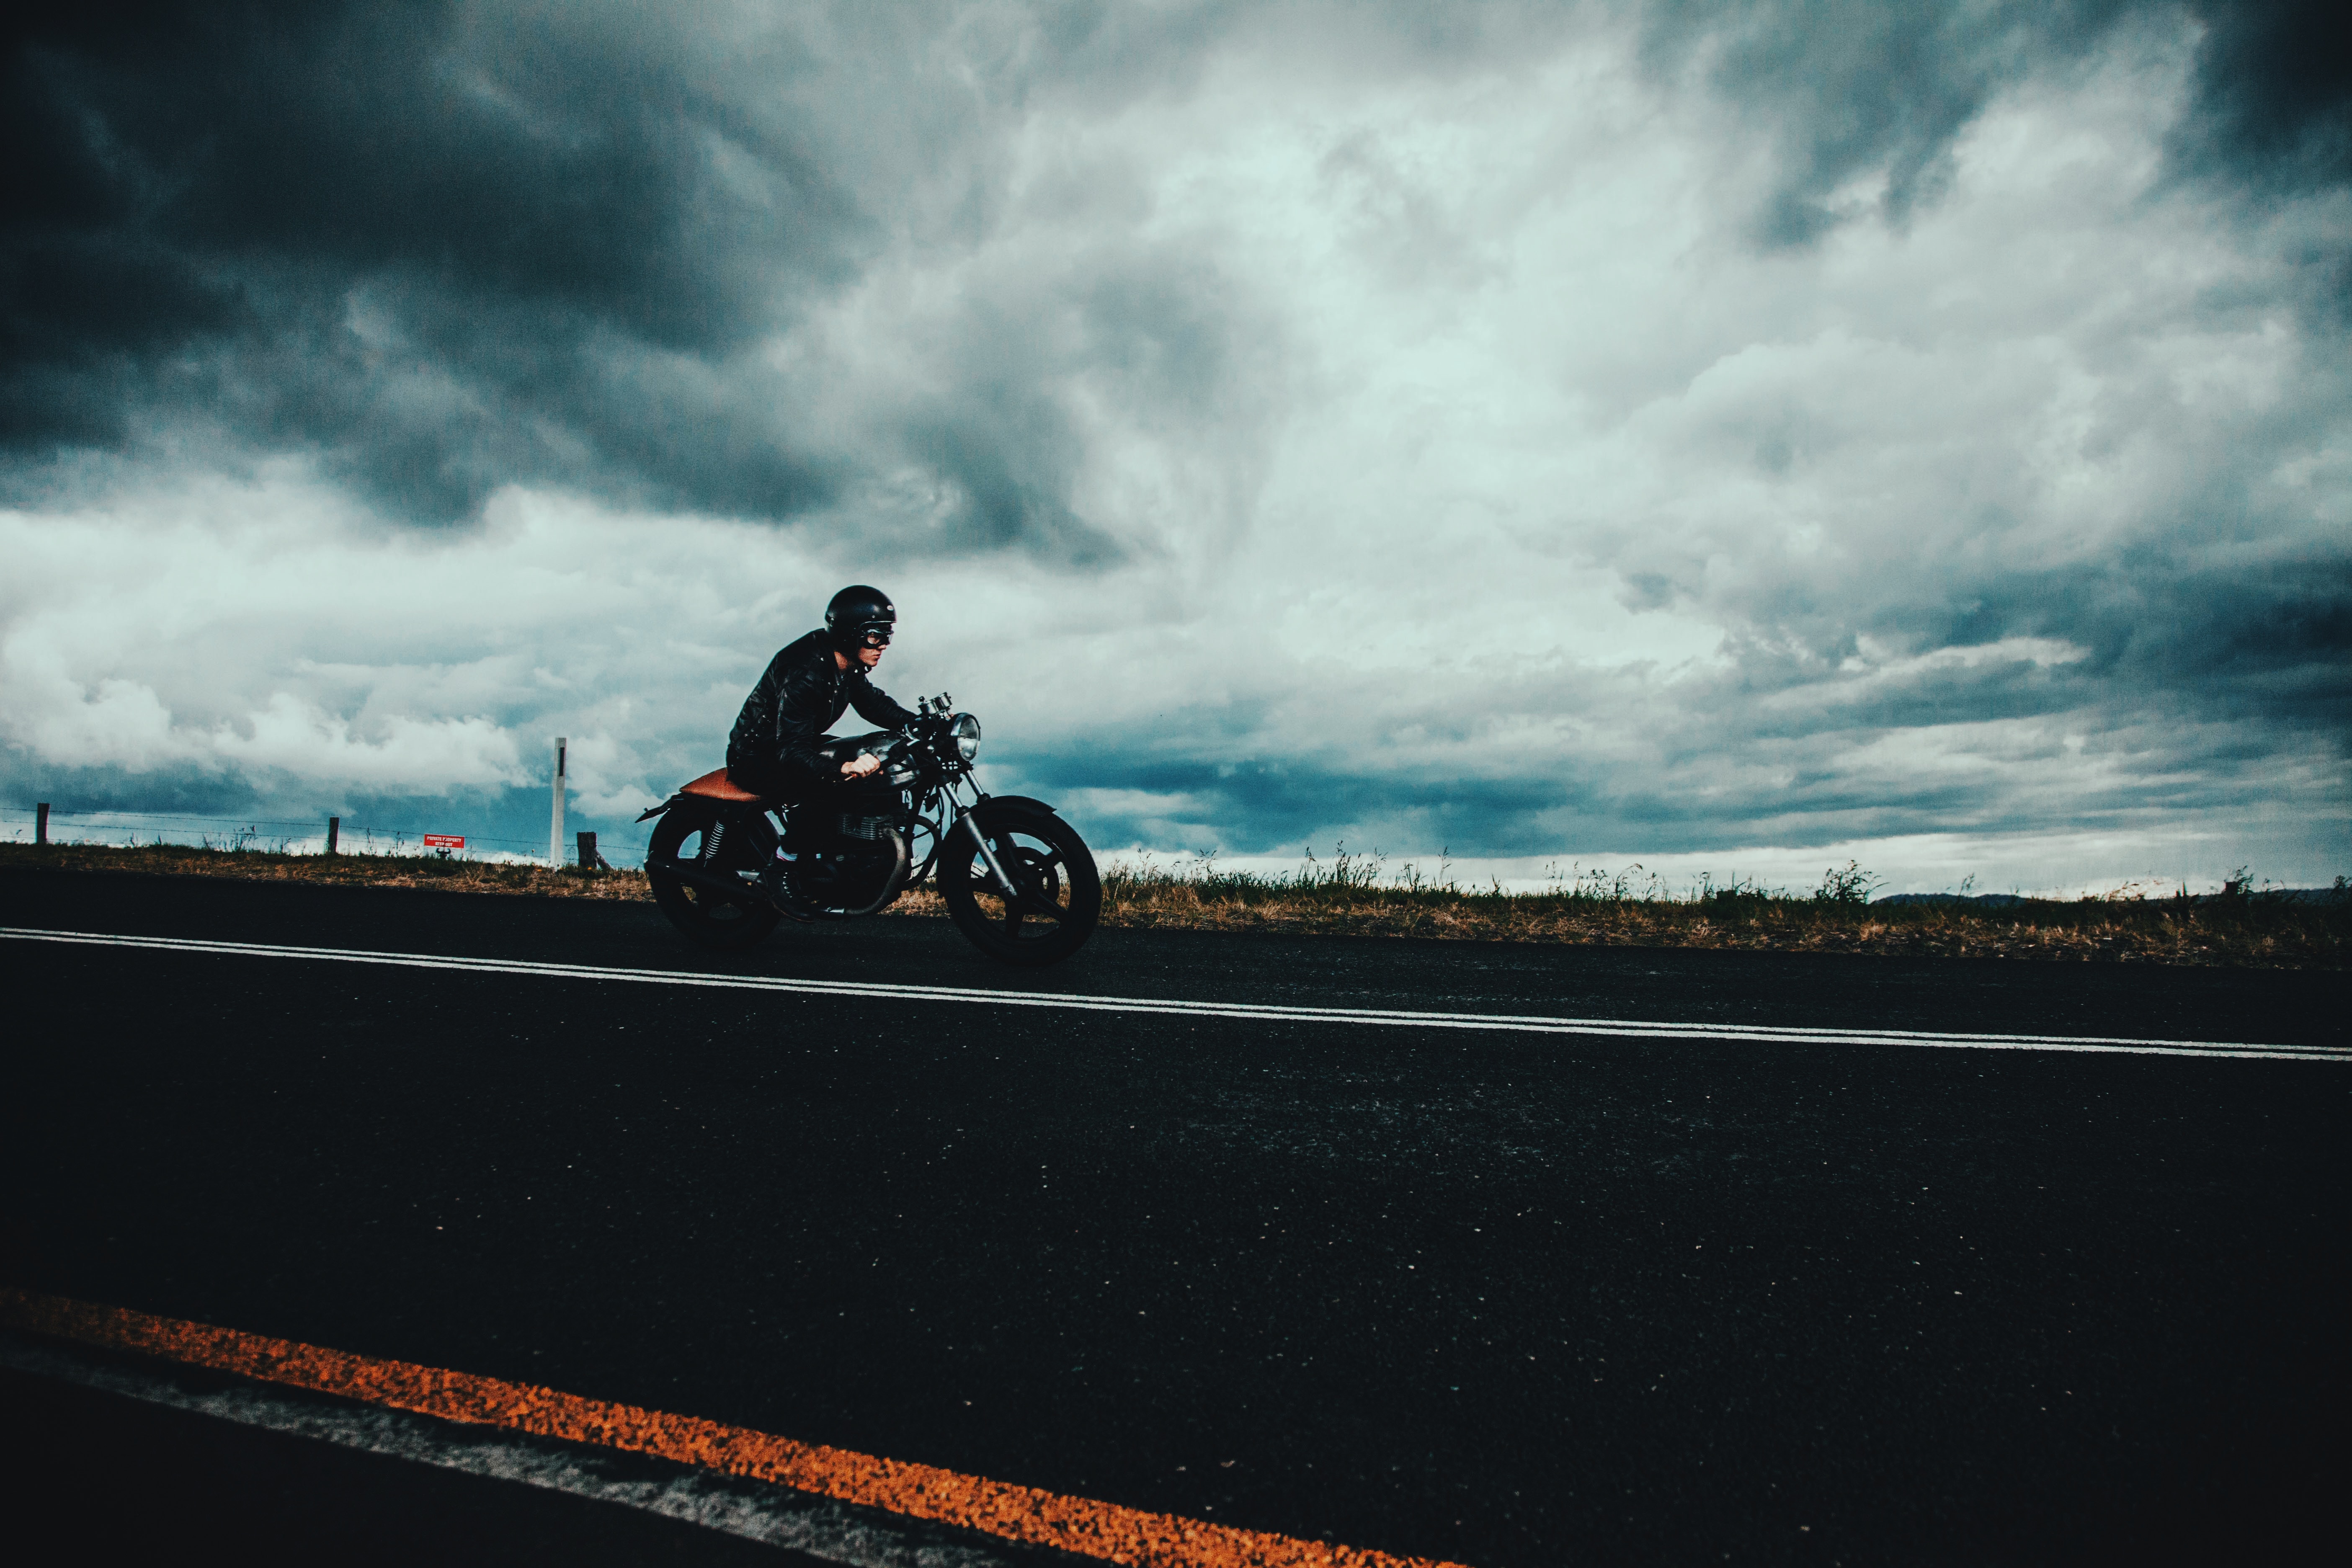 68832 Screensavers and Wallpapers Motorcyclist for phone. Download clouds, motorcycles, road, markup, asphalt, motorcyclist, helmet, mainly cloudy, overcast pictures for free